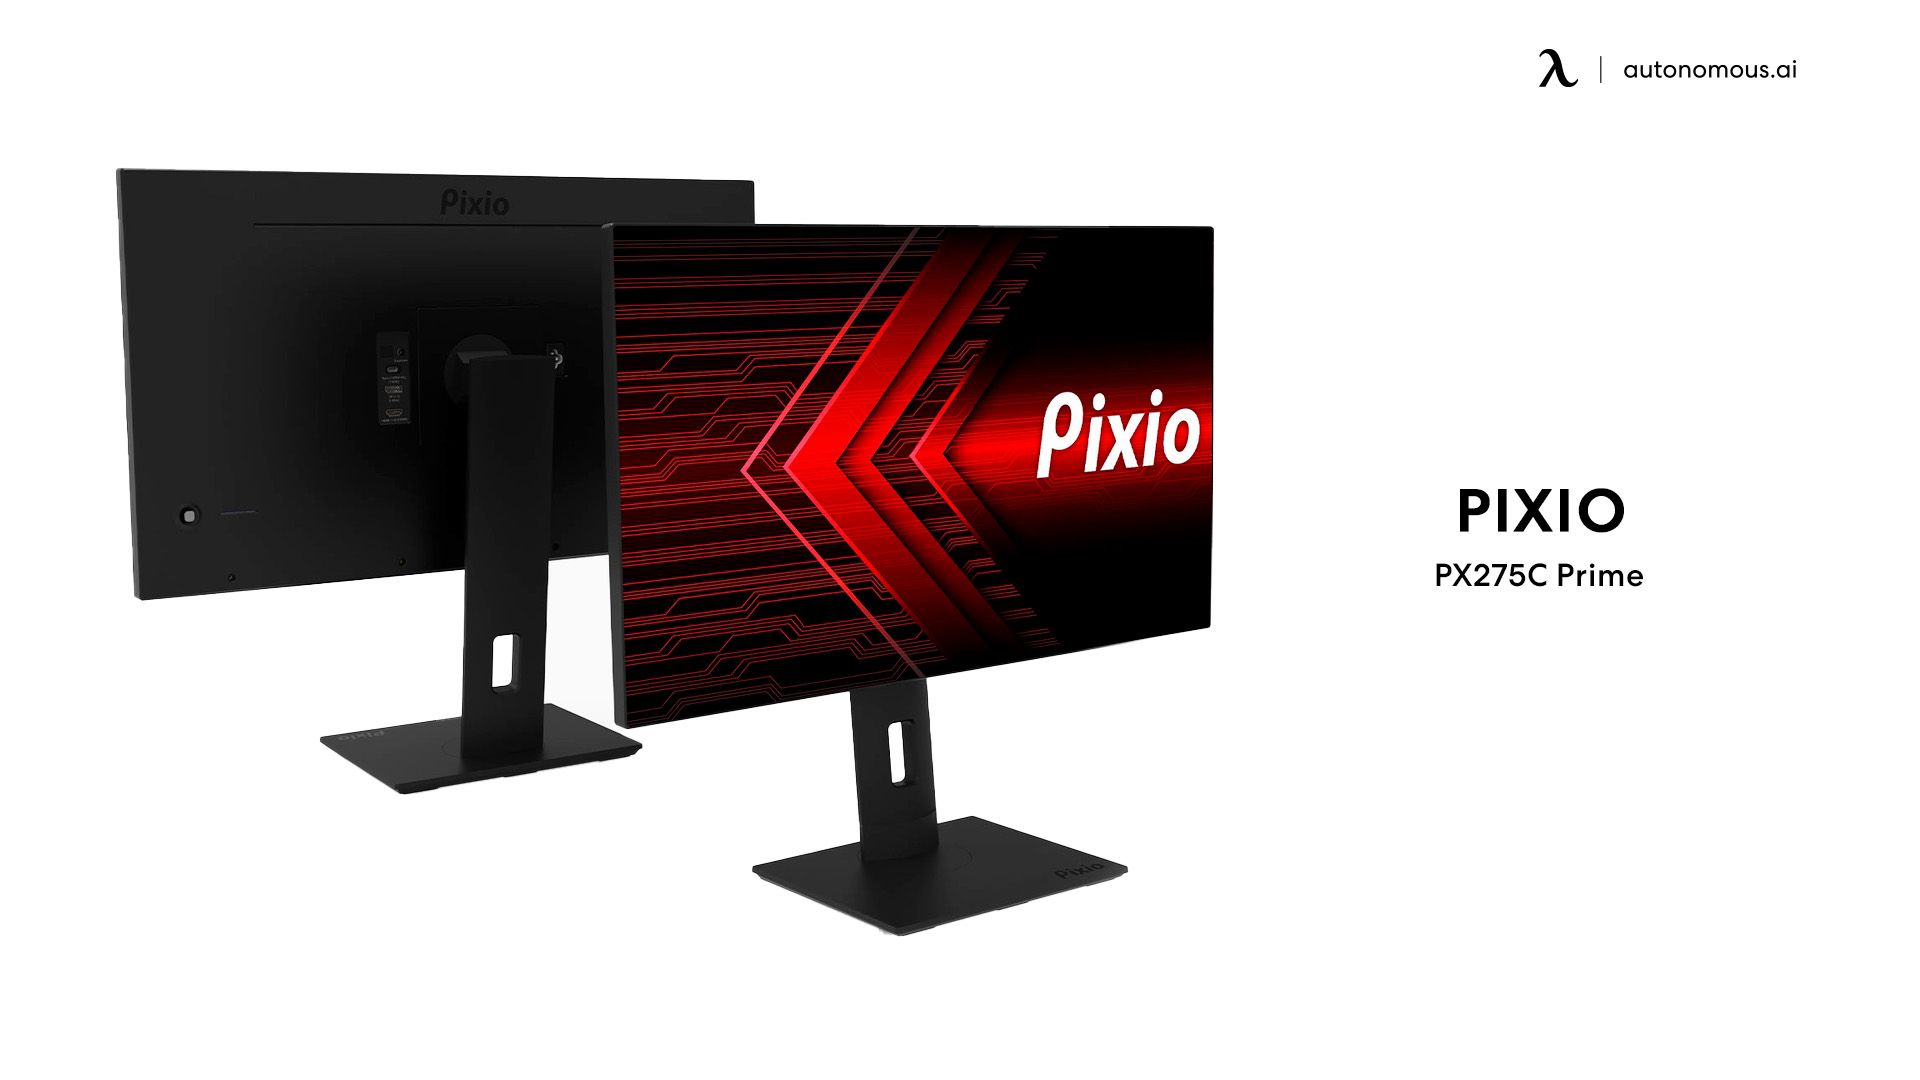 Productivity Monitor PX275C Prime by Pixio